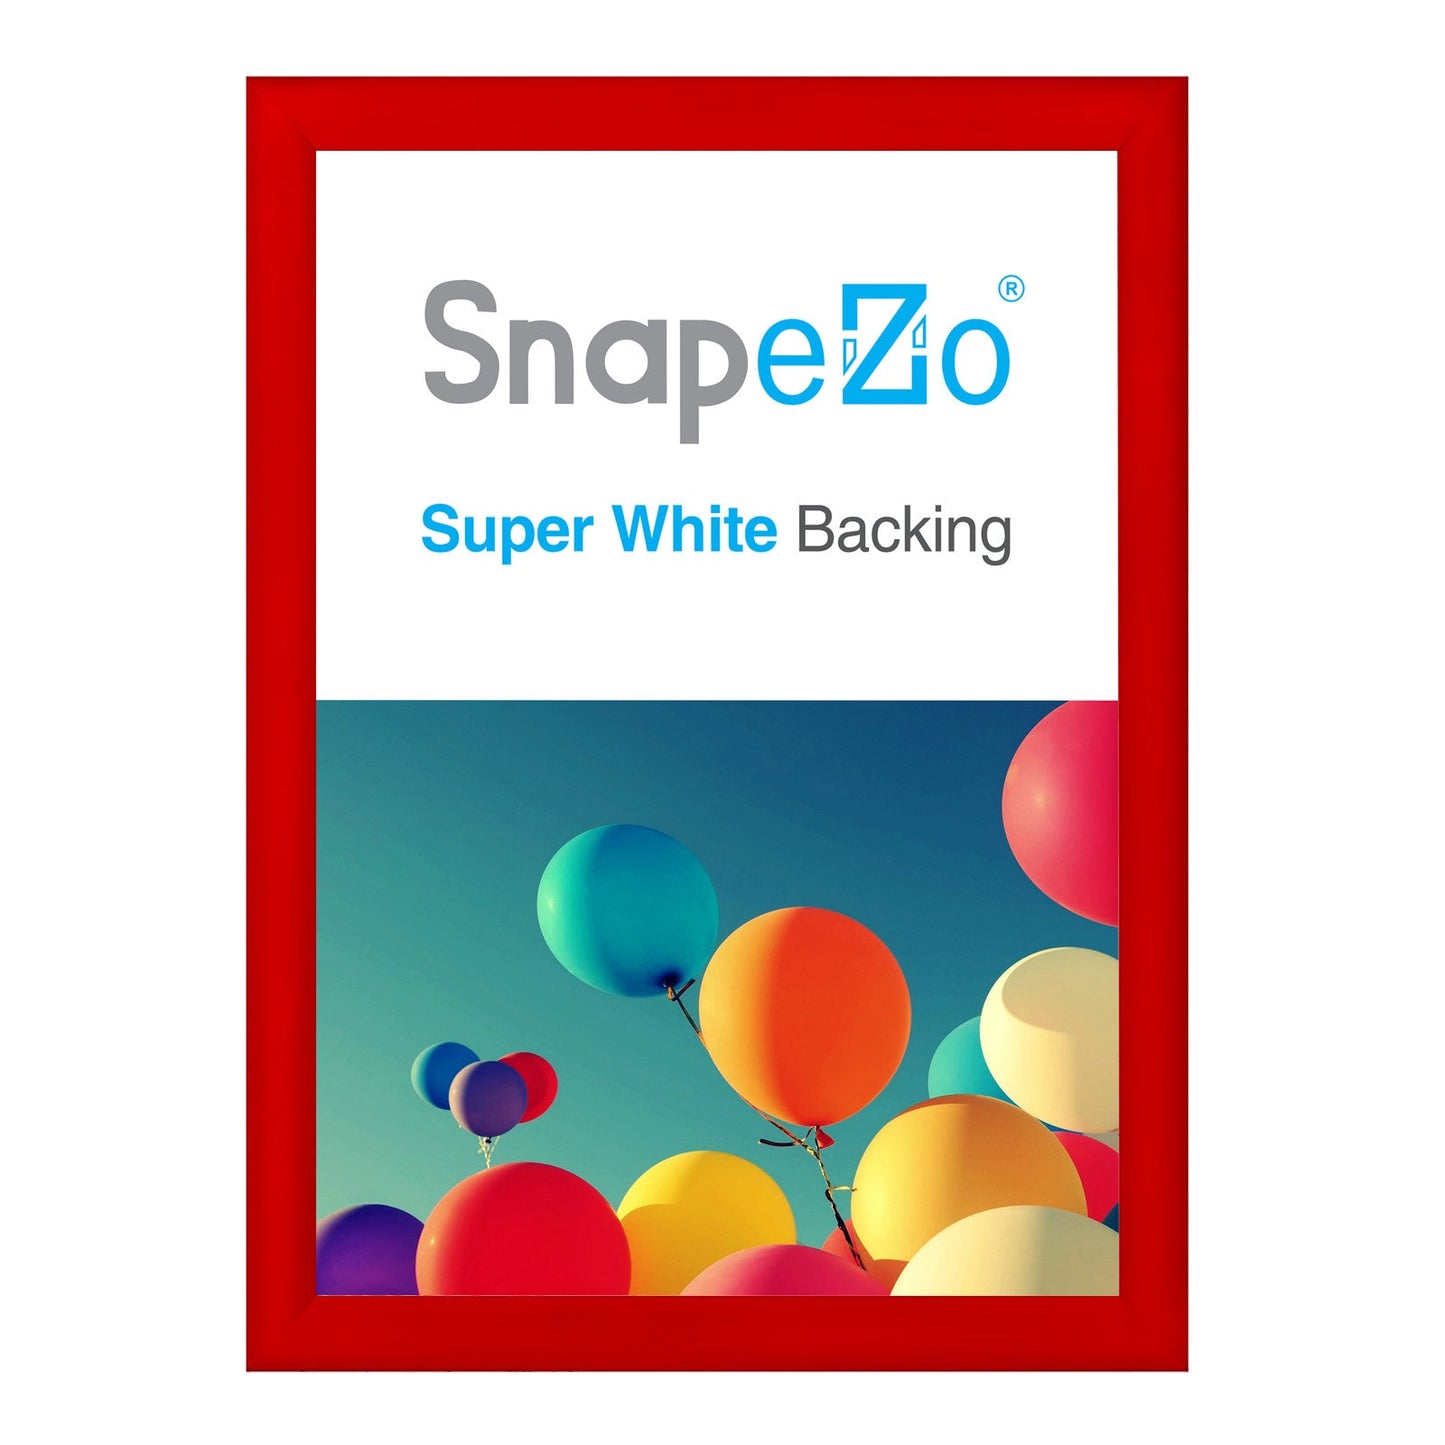 28x38 Red SnapeZo® Snap Frame - 1.2" Profile